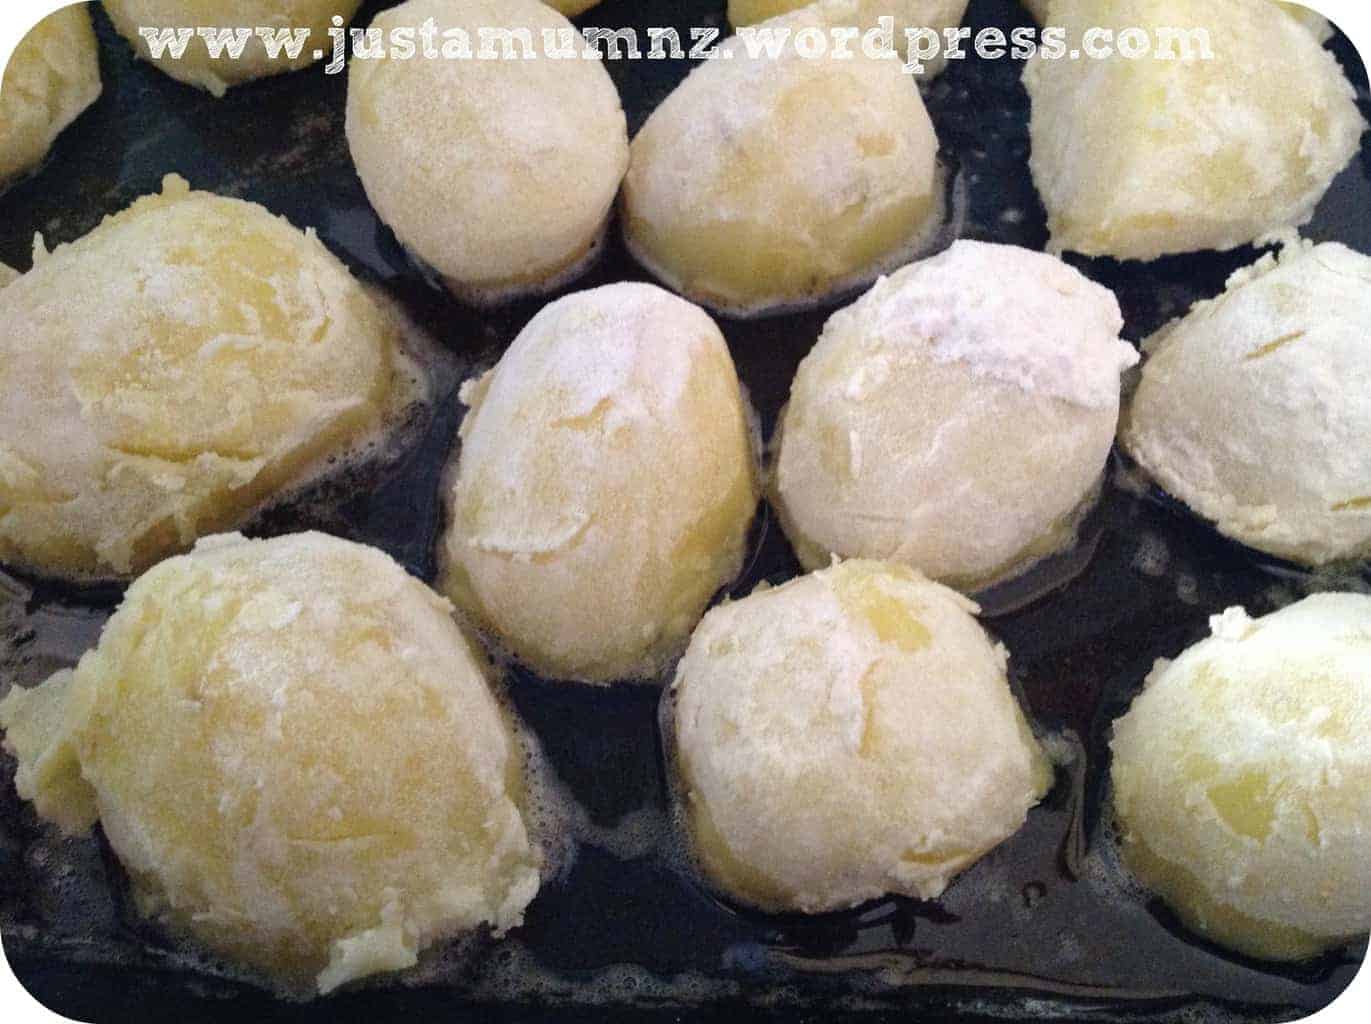 Bake the par boiled potatoes in a mixture of butter and oil 